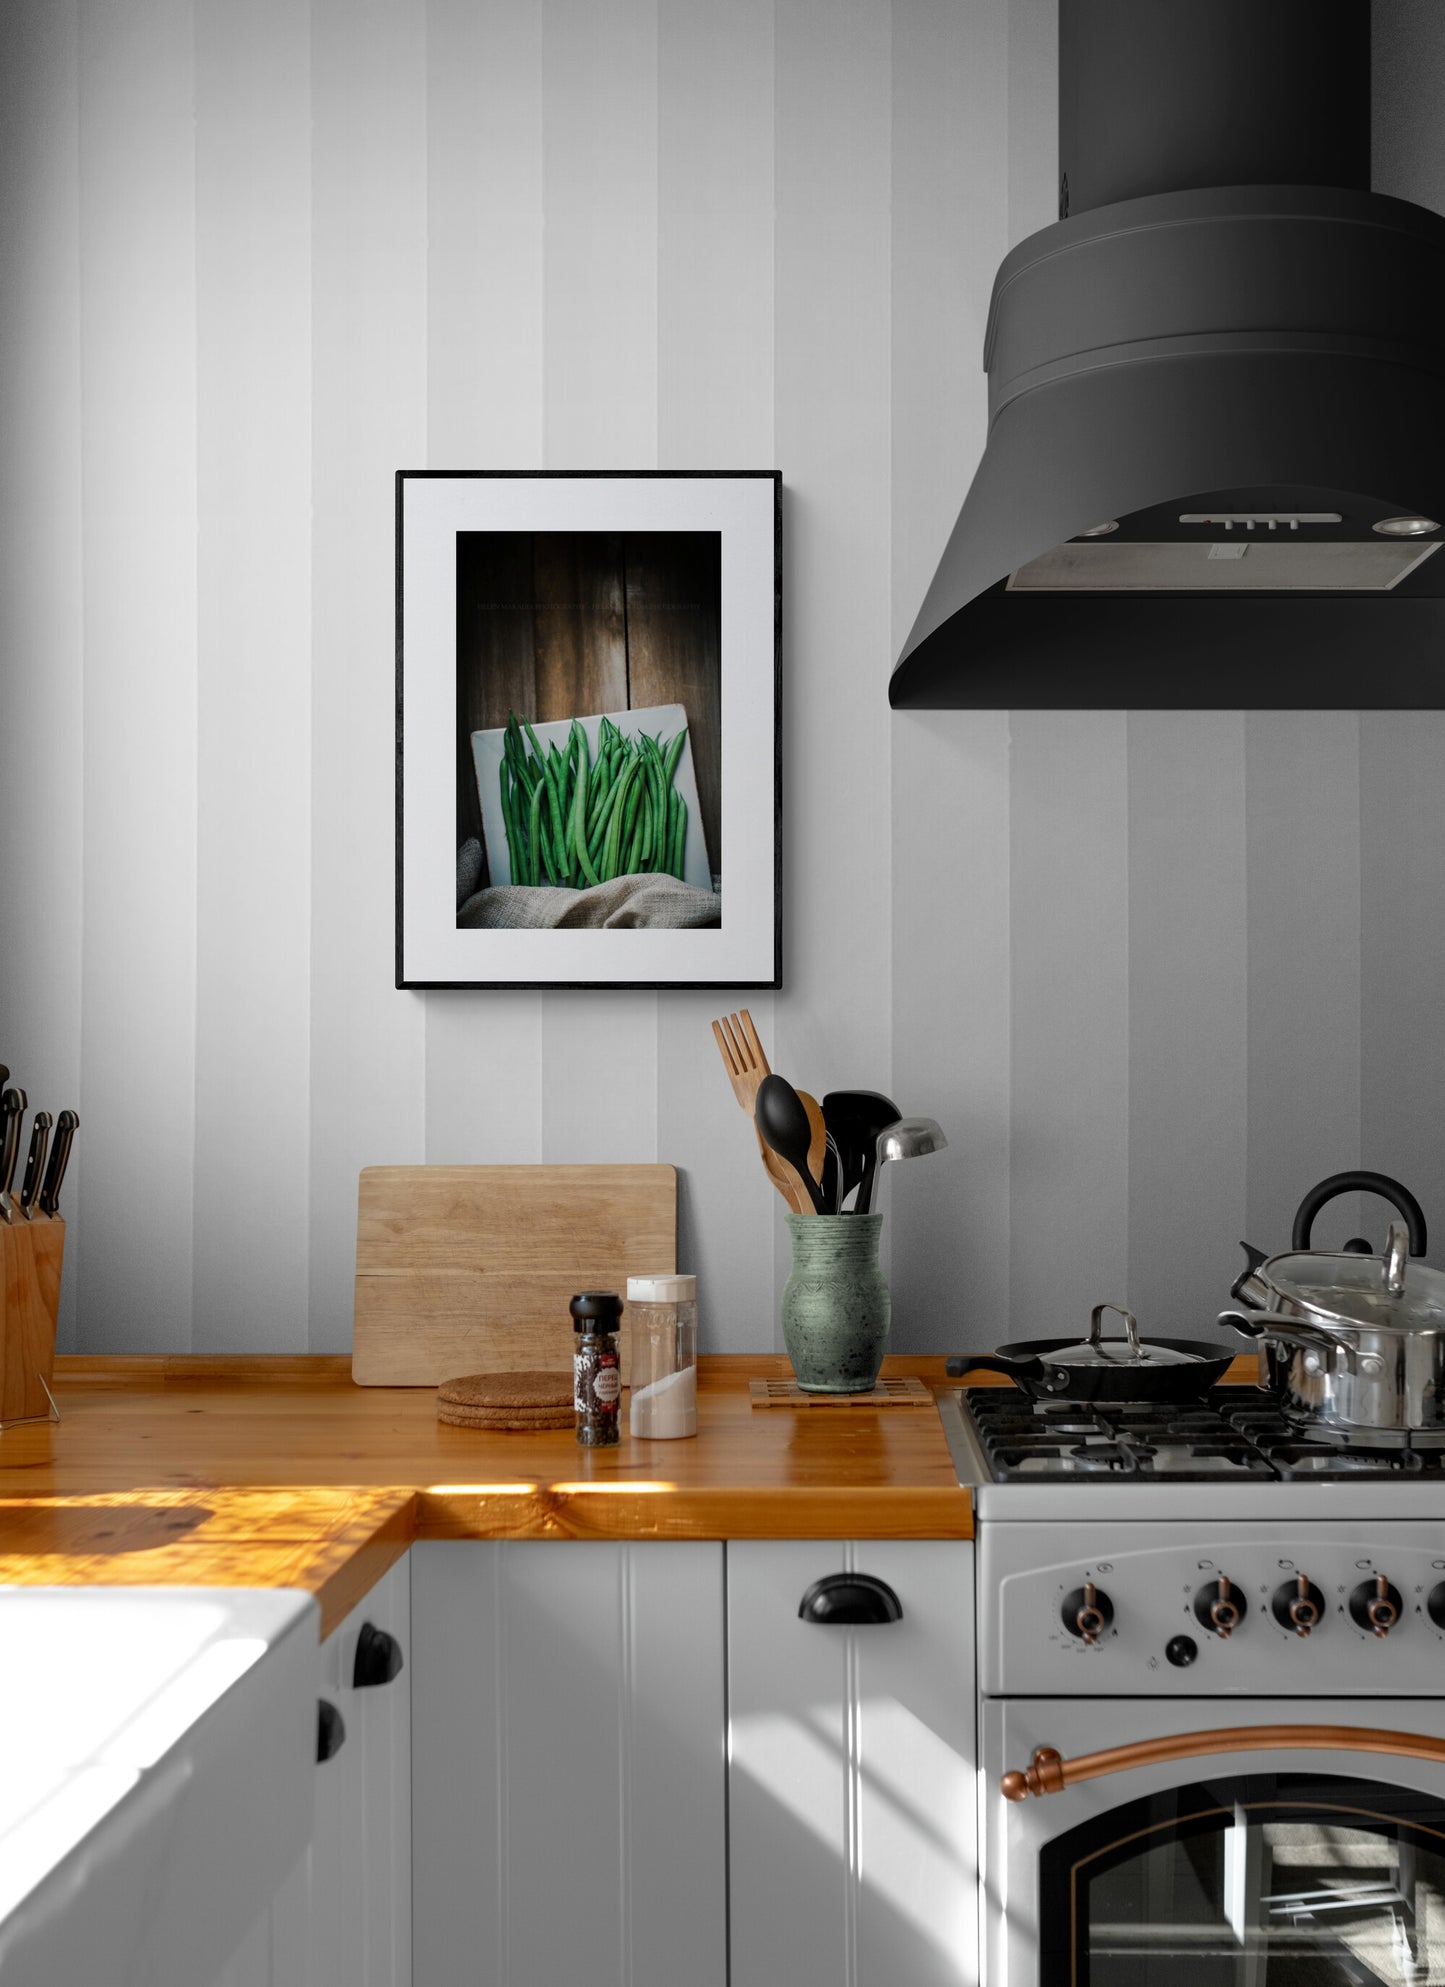 Photograph of green beans in a kitchen as wall art